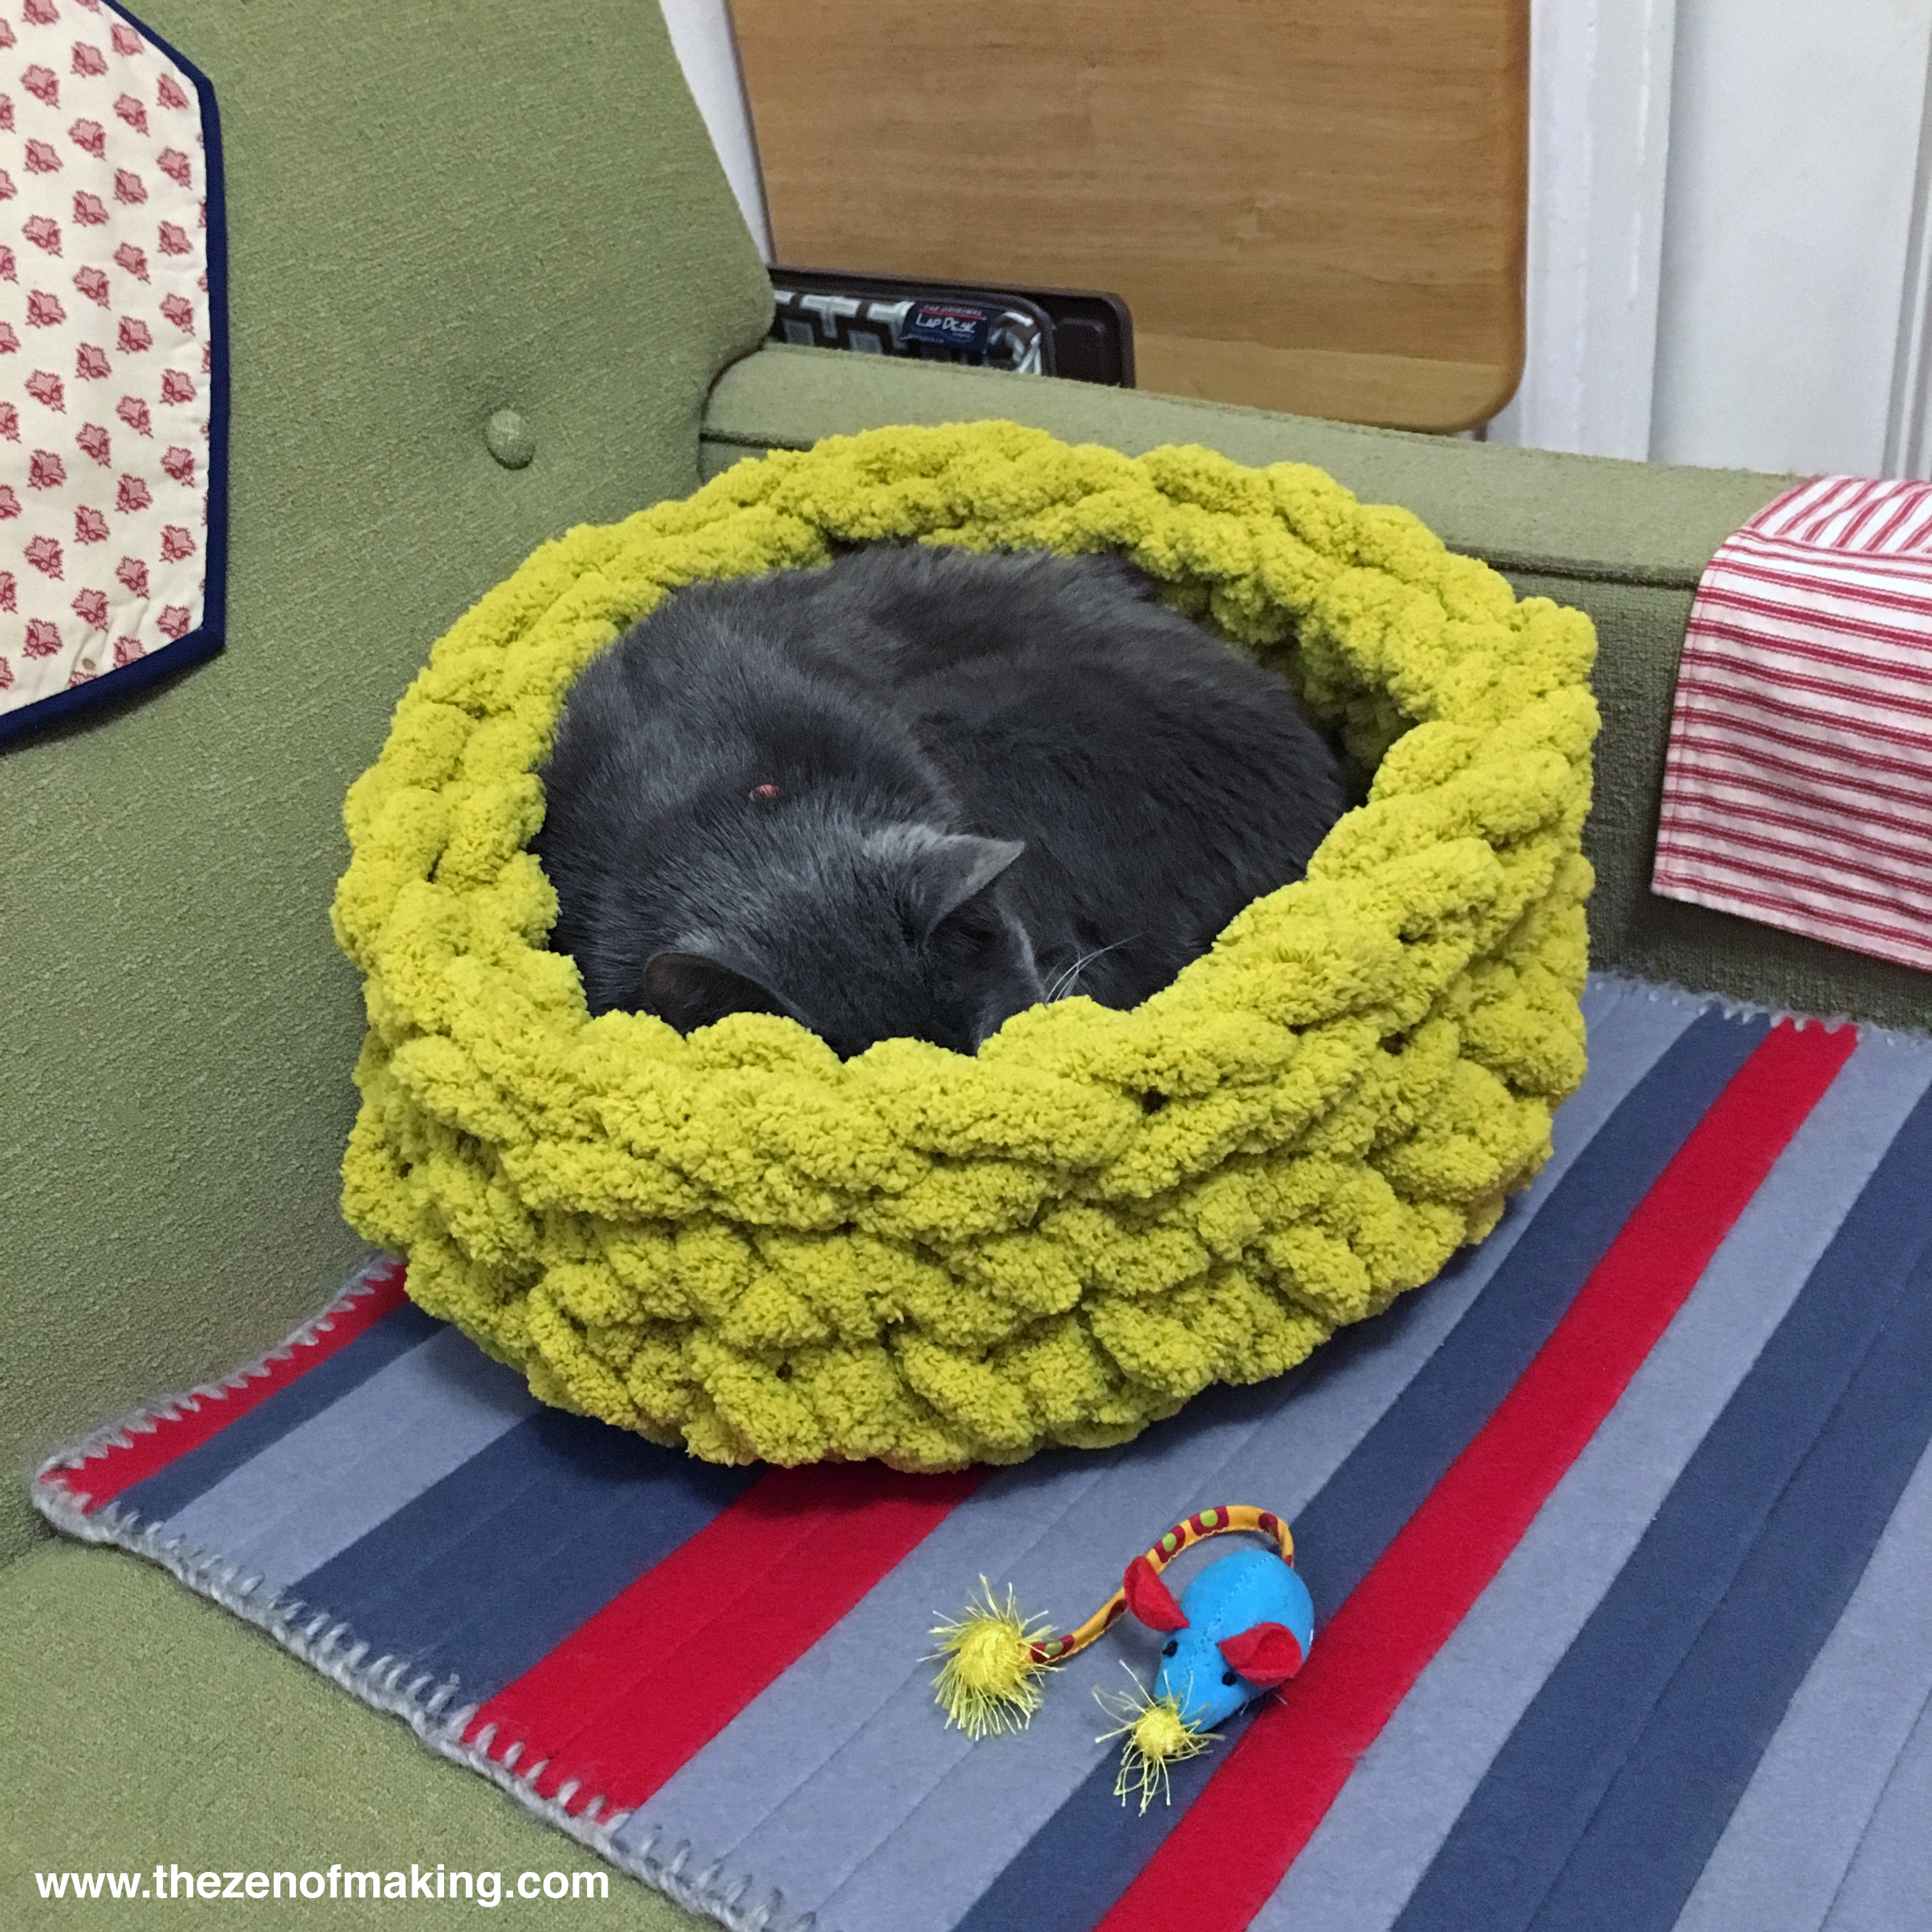 Project Update Super Bulky Crocheted Cat Bed with Bernat Blanket Big Yarn